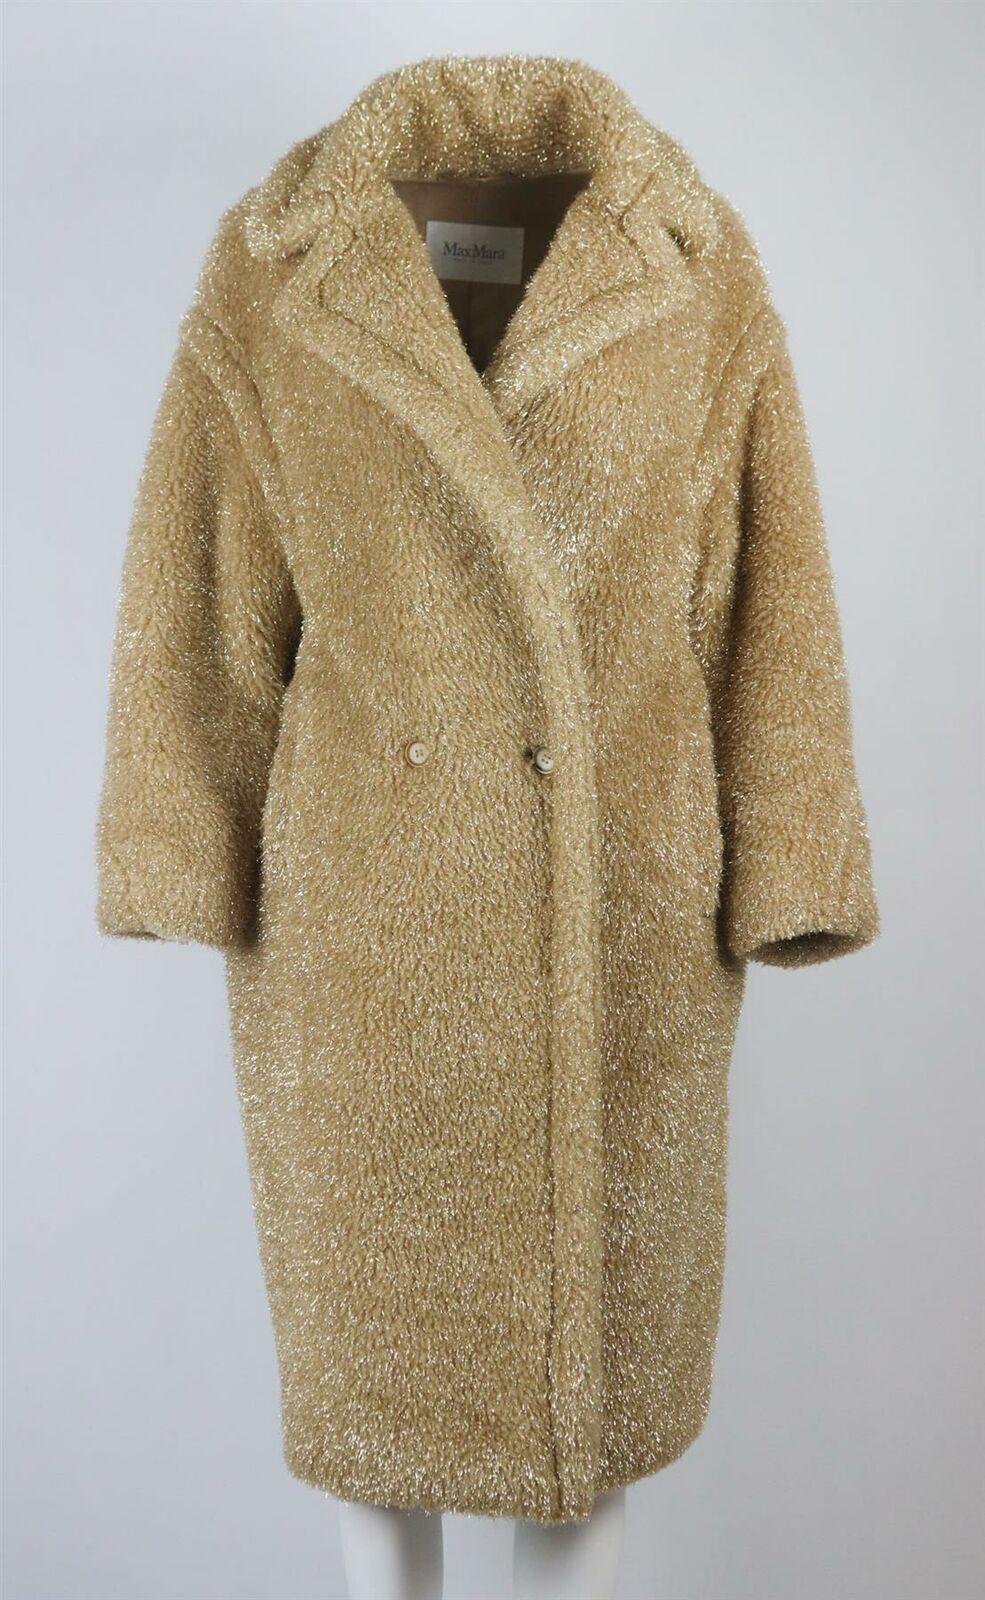 Max Mara's cult 'Teddy Bear' coat was such a hit when it first launched in 2013 that it was reissued again and again - the label says that wearing it 